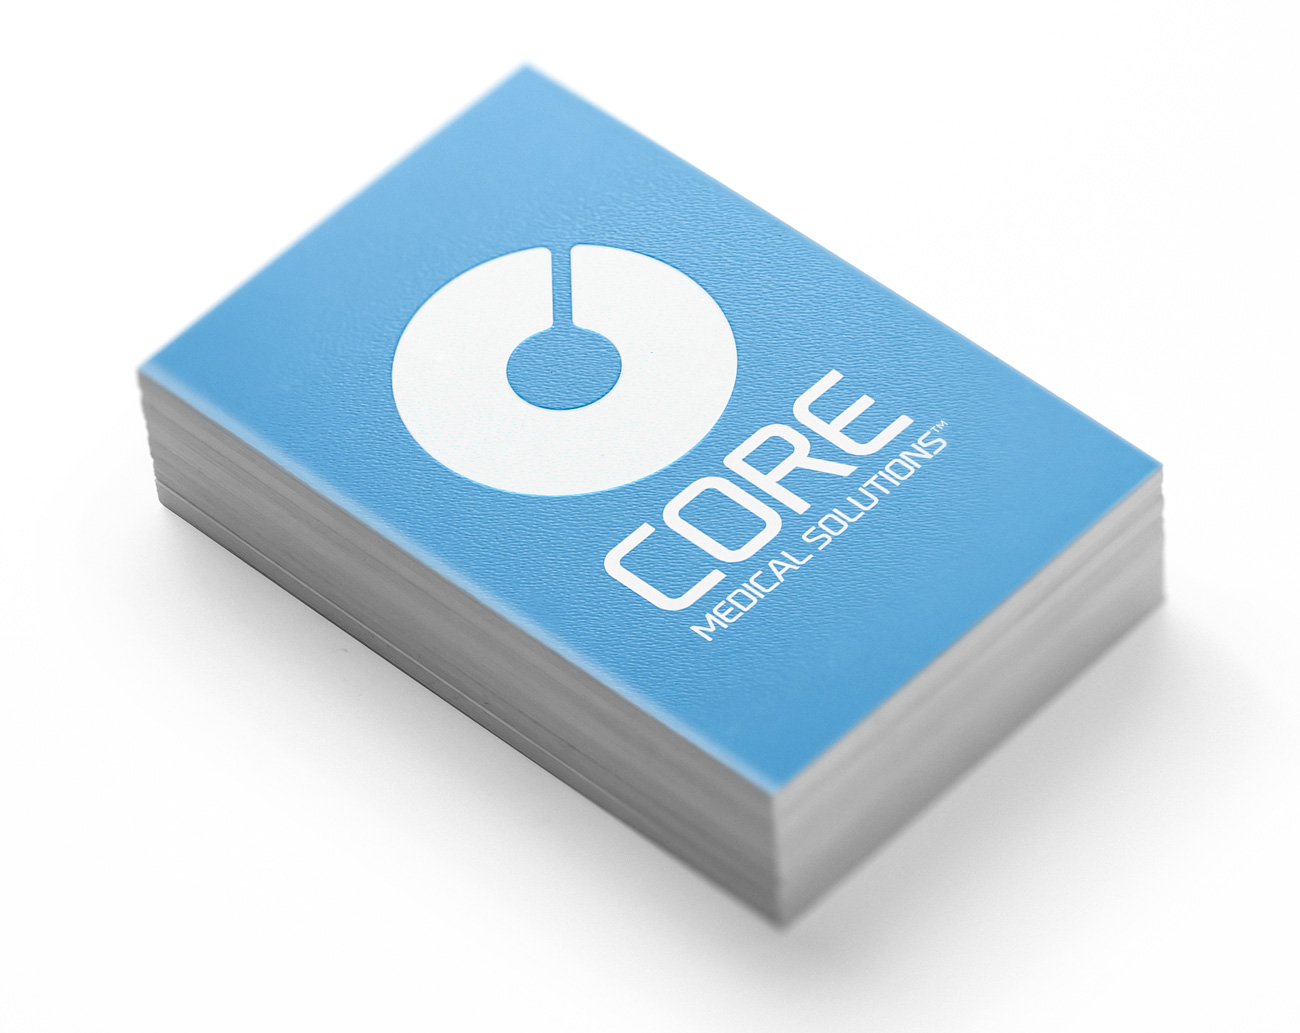 wow-core-business-card